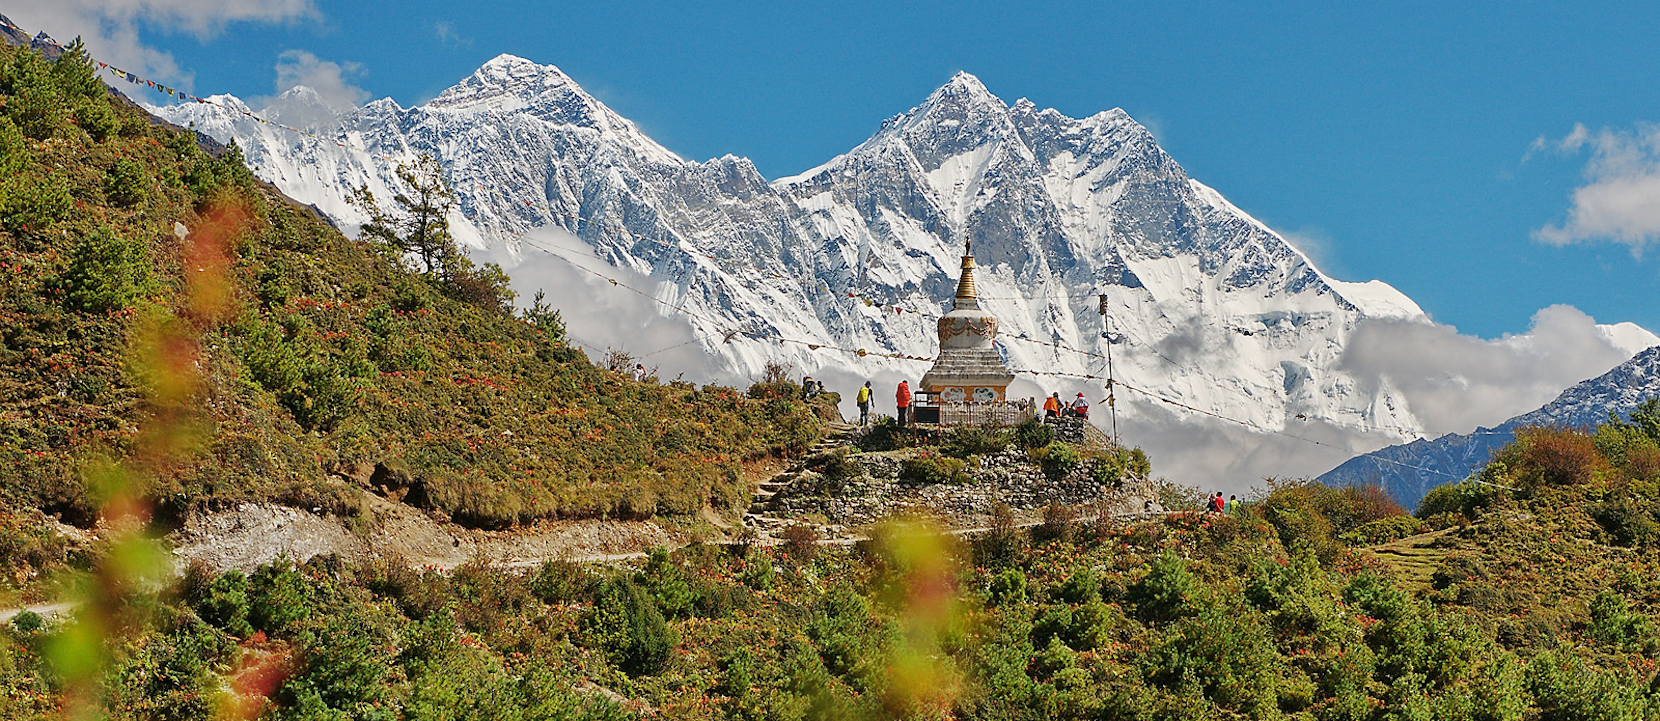 6 Day Majestic Nepal and Mount Everest tour ( Private tour for two ) WITH MT EVEREST MOUNTAIN FLIGHT INCLUDED 